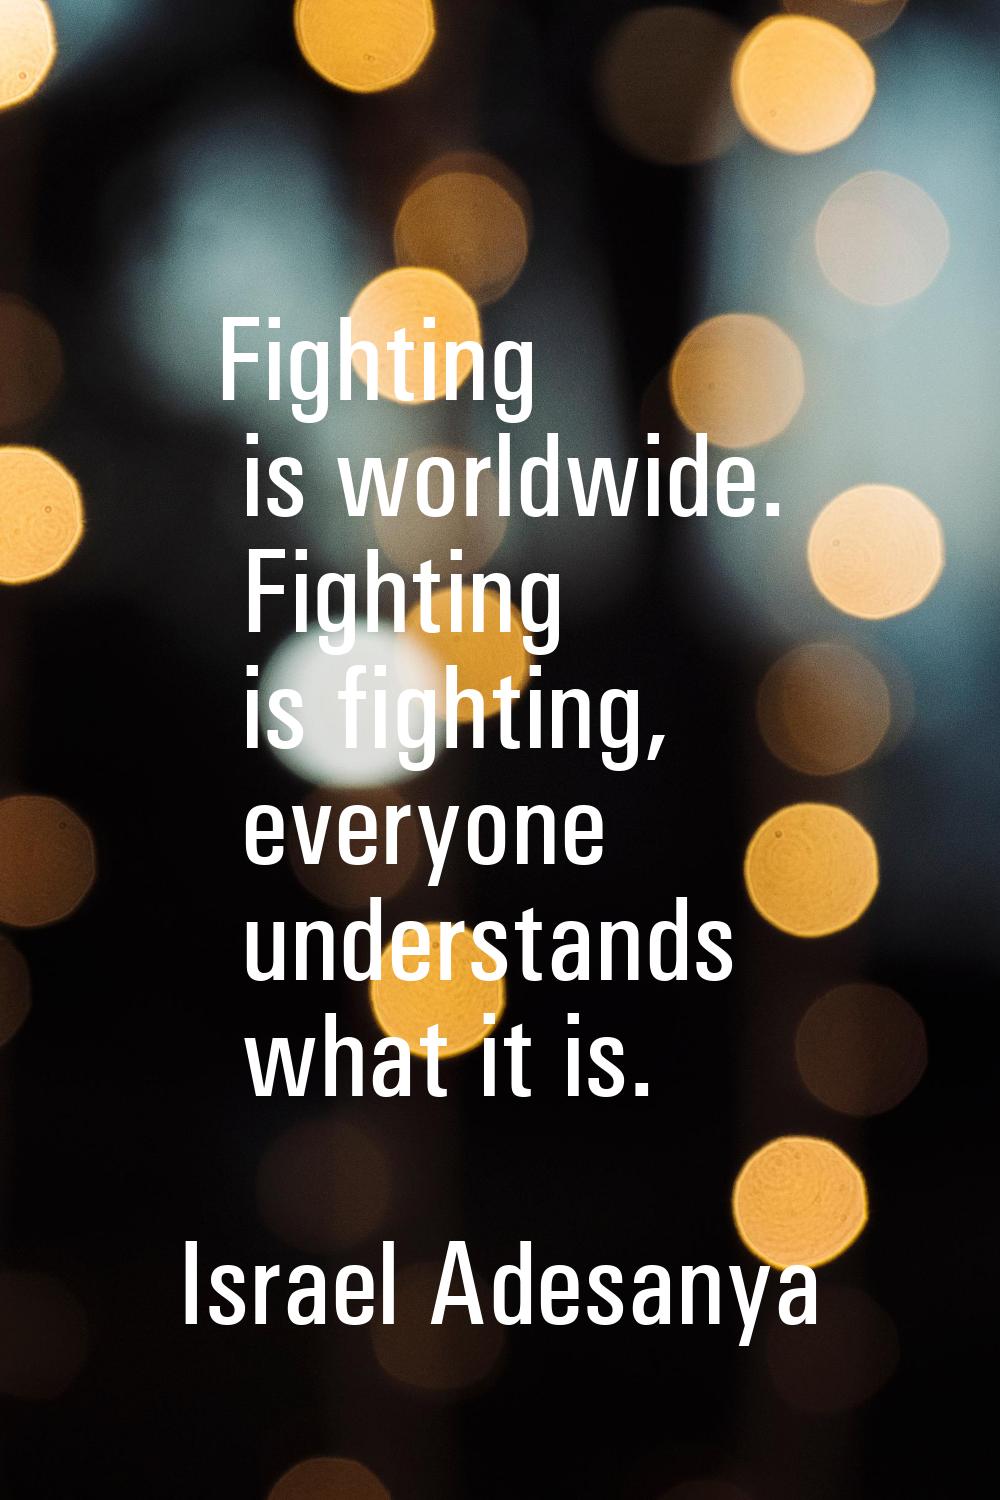 Fighting is worldwide. Fighting is fighting, everyone understands what it is.